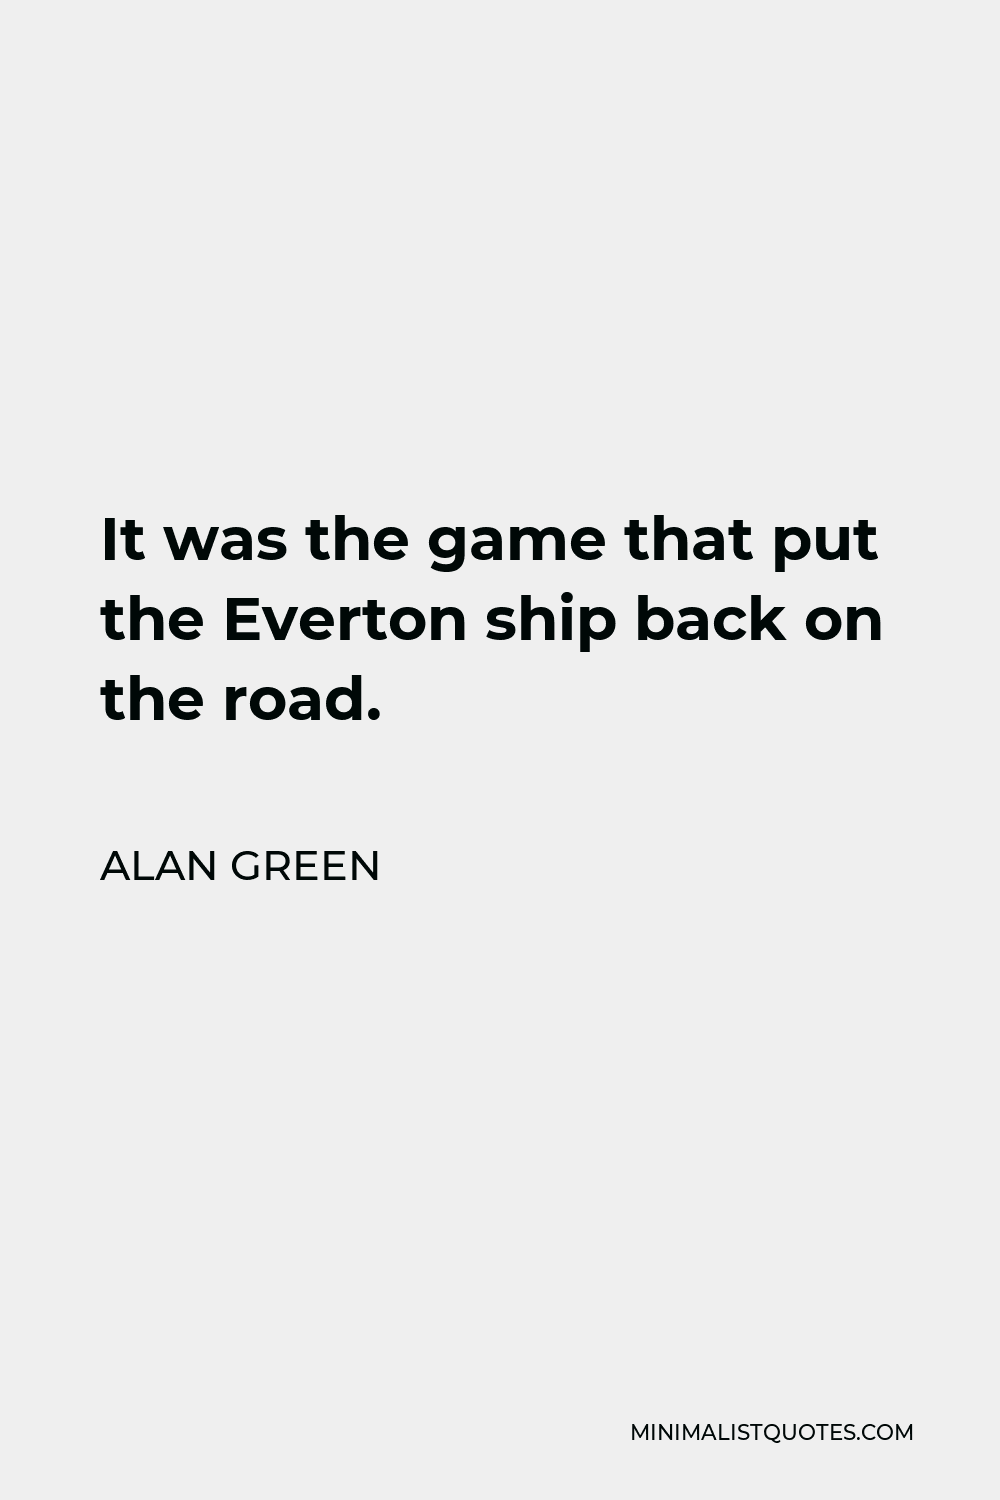 Alan Green Quote - It was the game that put the Everton ship back on the road.